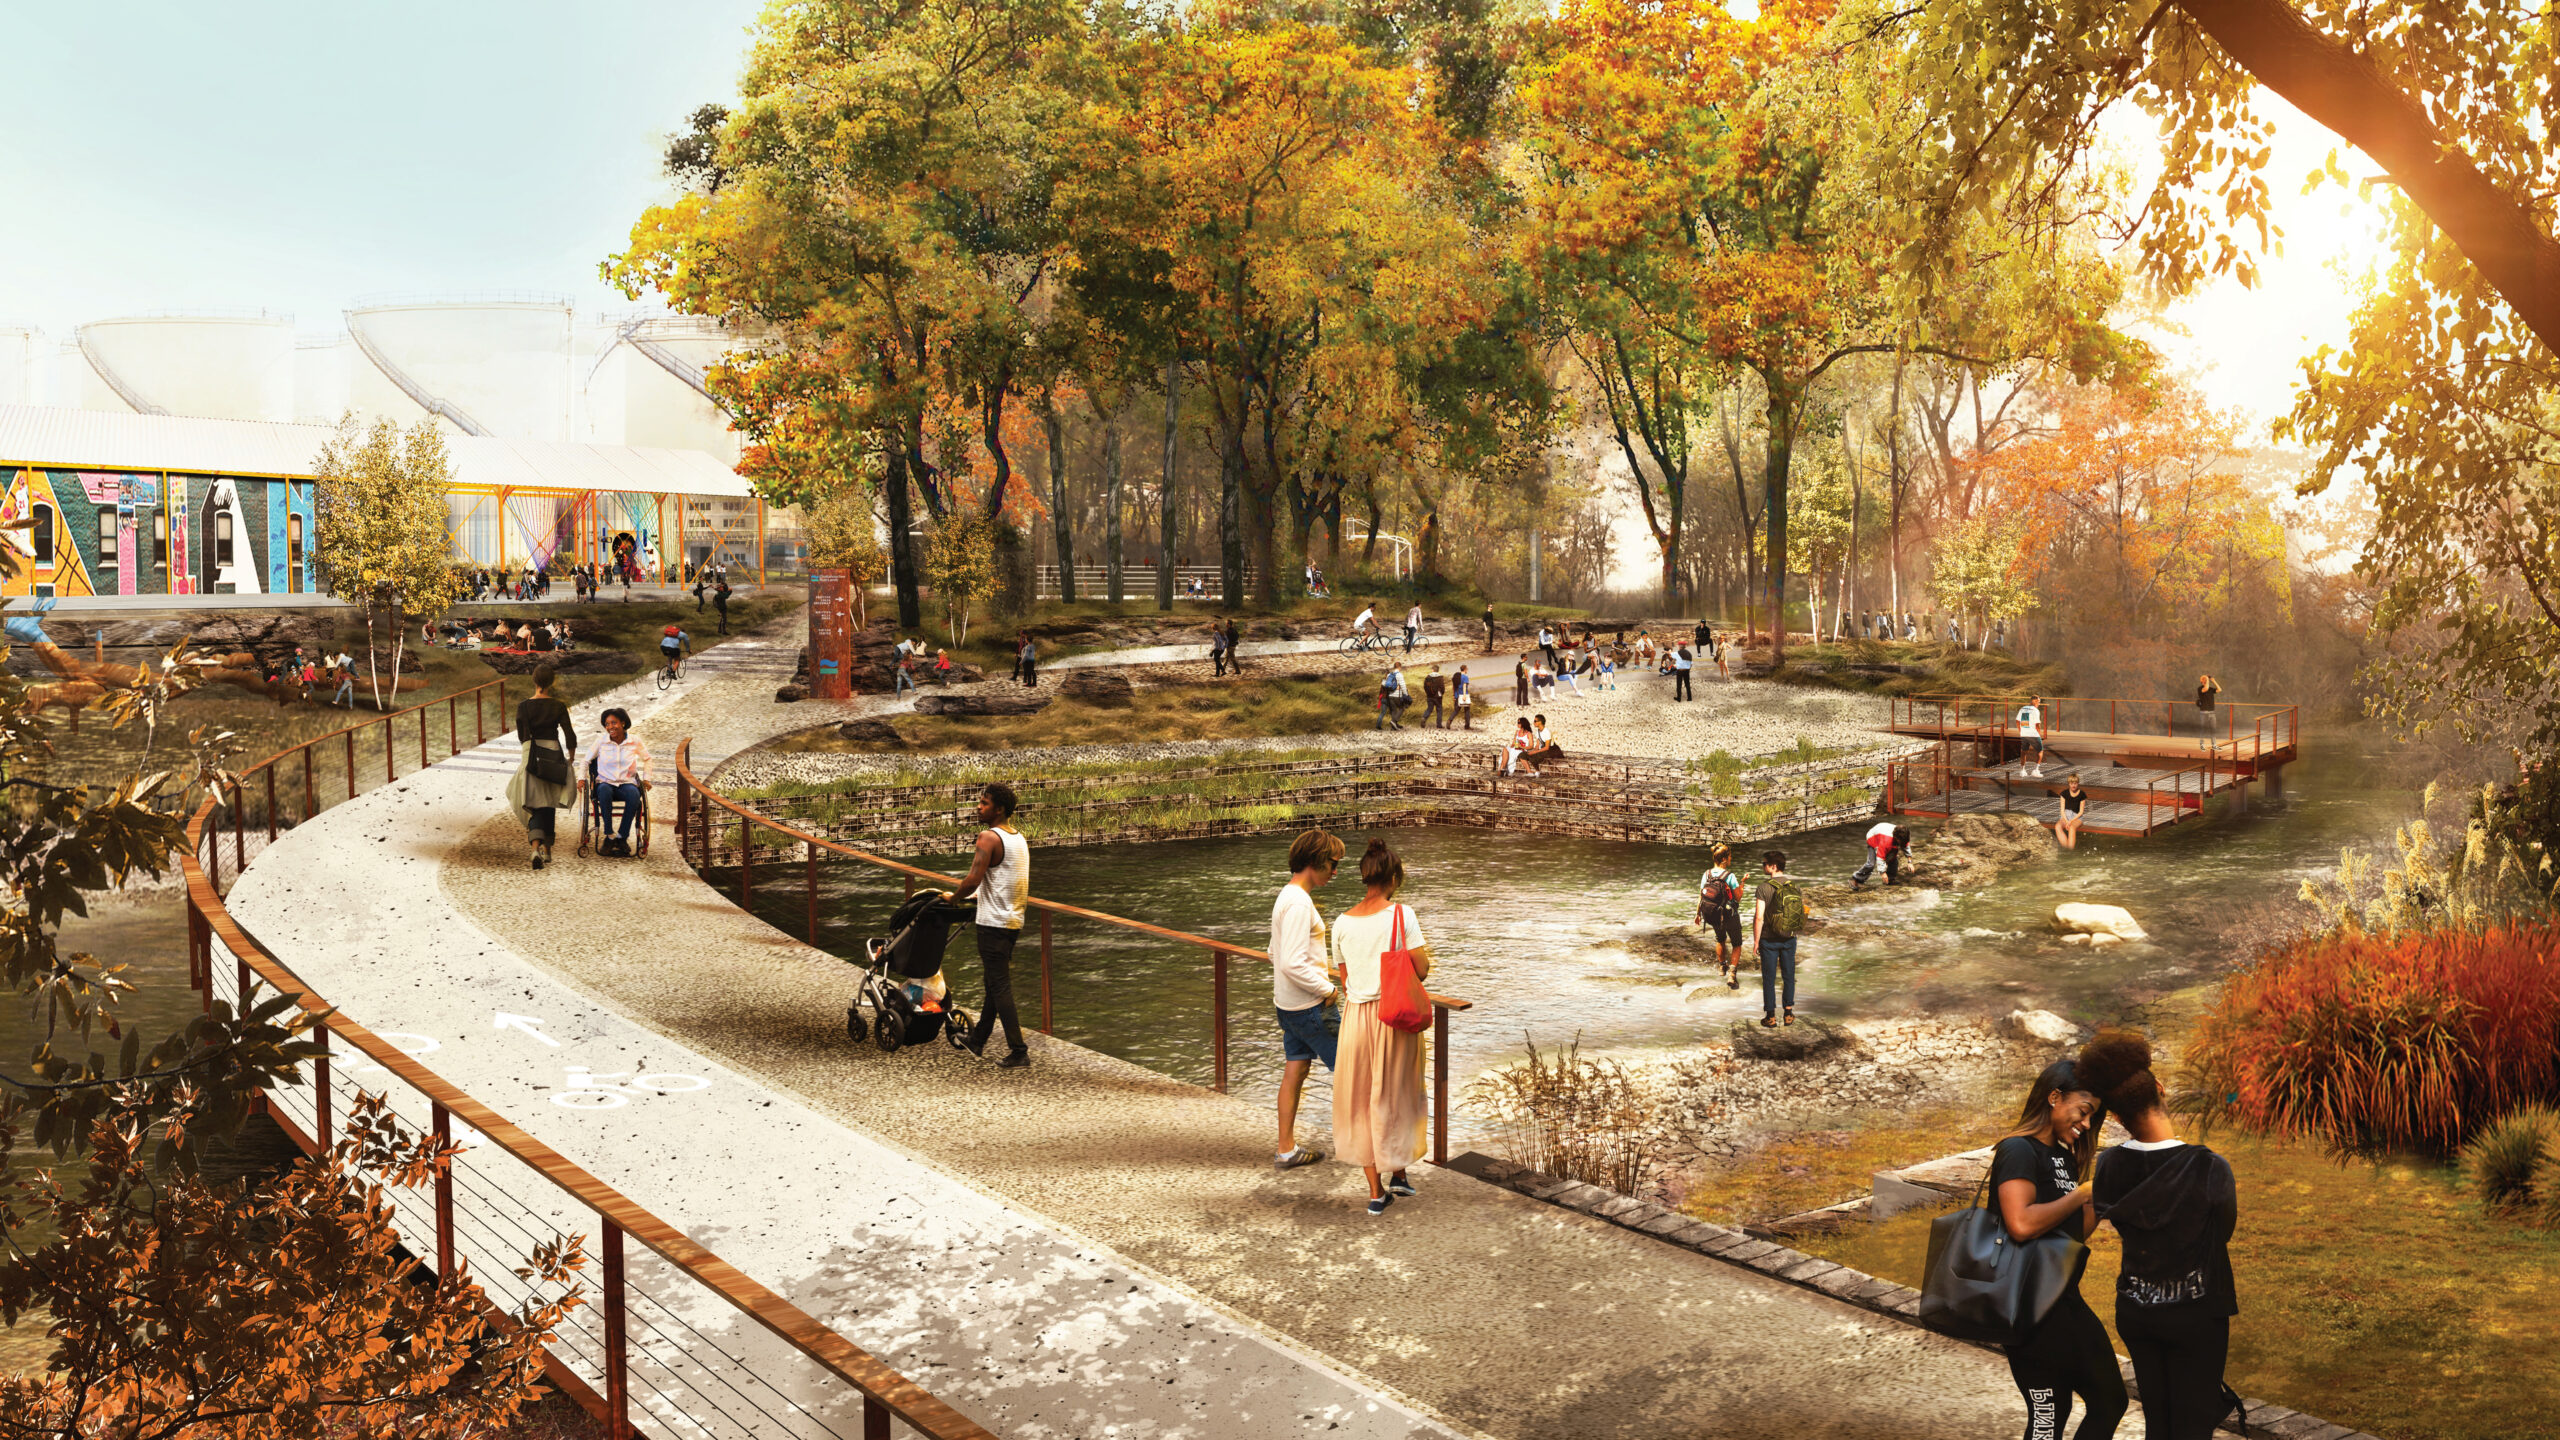 An artist's rendering of a park with people walking around.